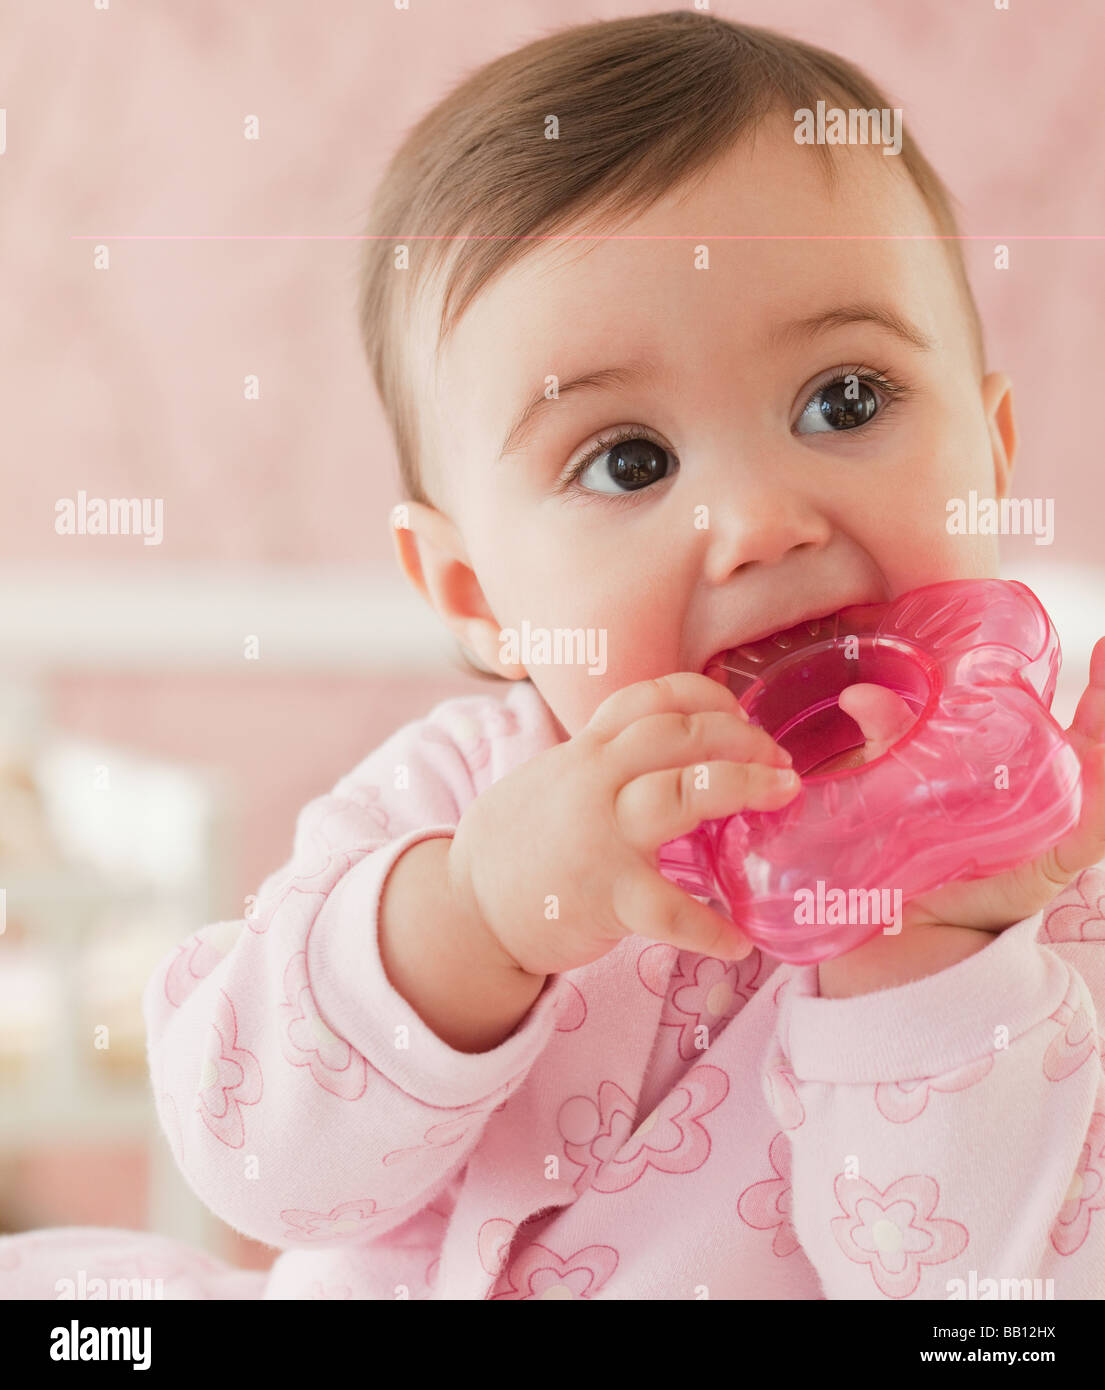 Mixed race baby girl chewing on plastic toy Stock Photo